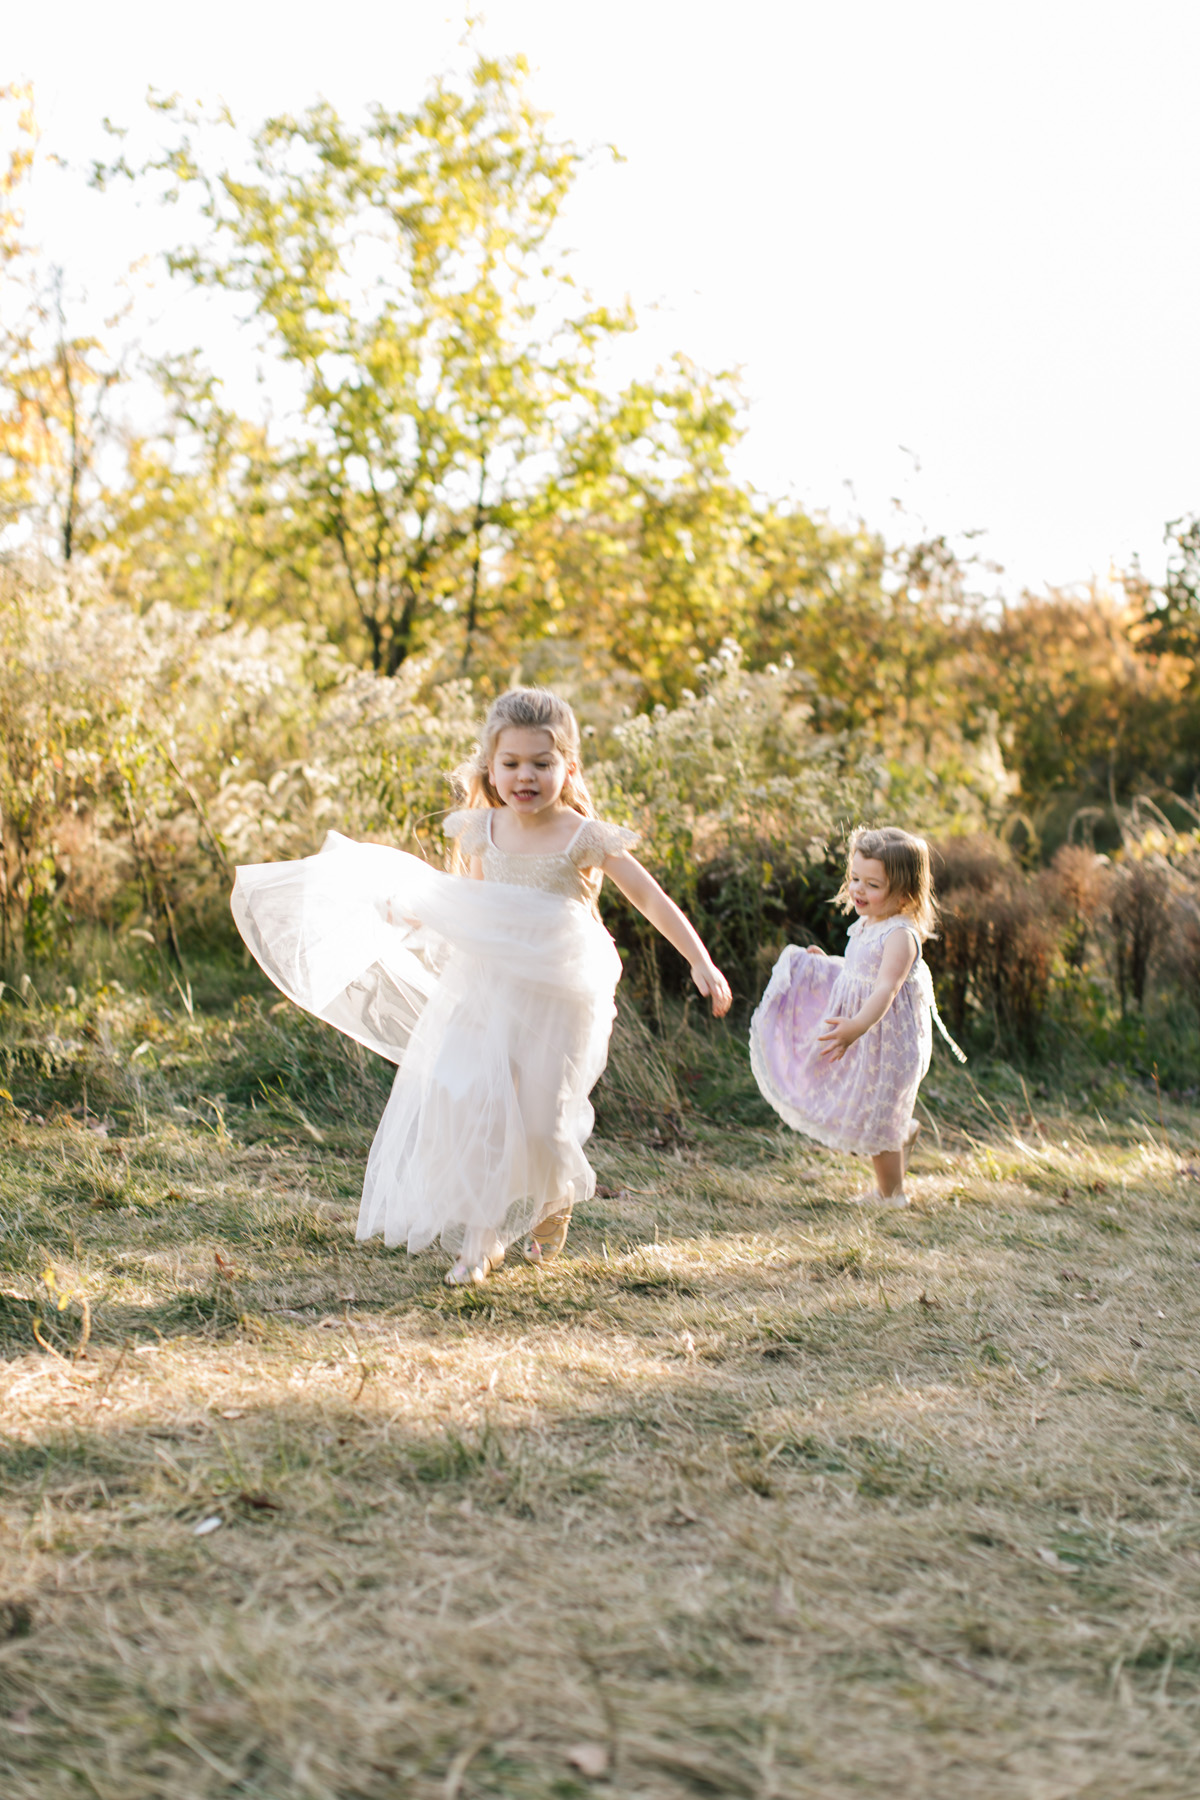 finding the light and documenting joy of children playing 